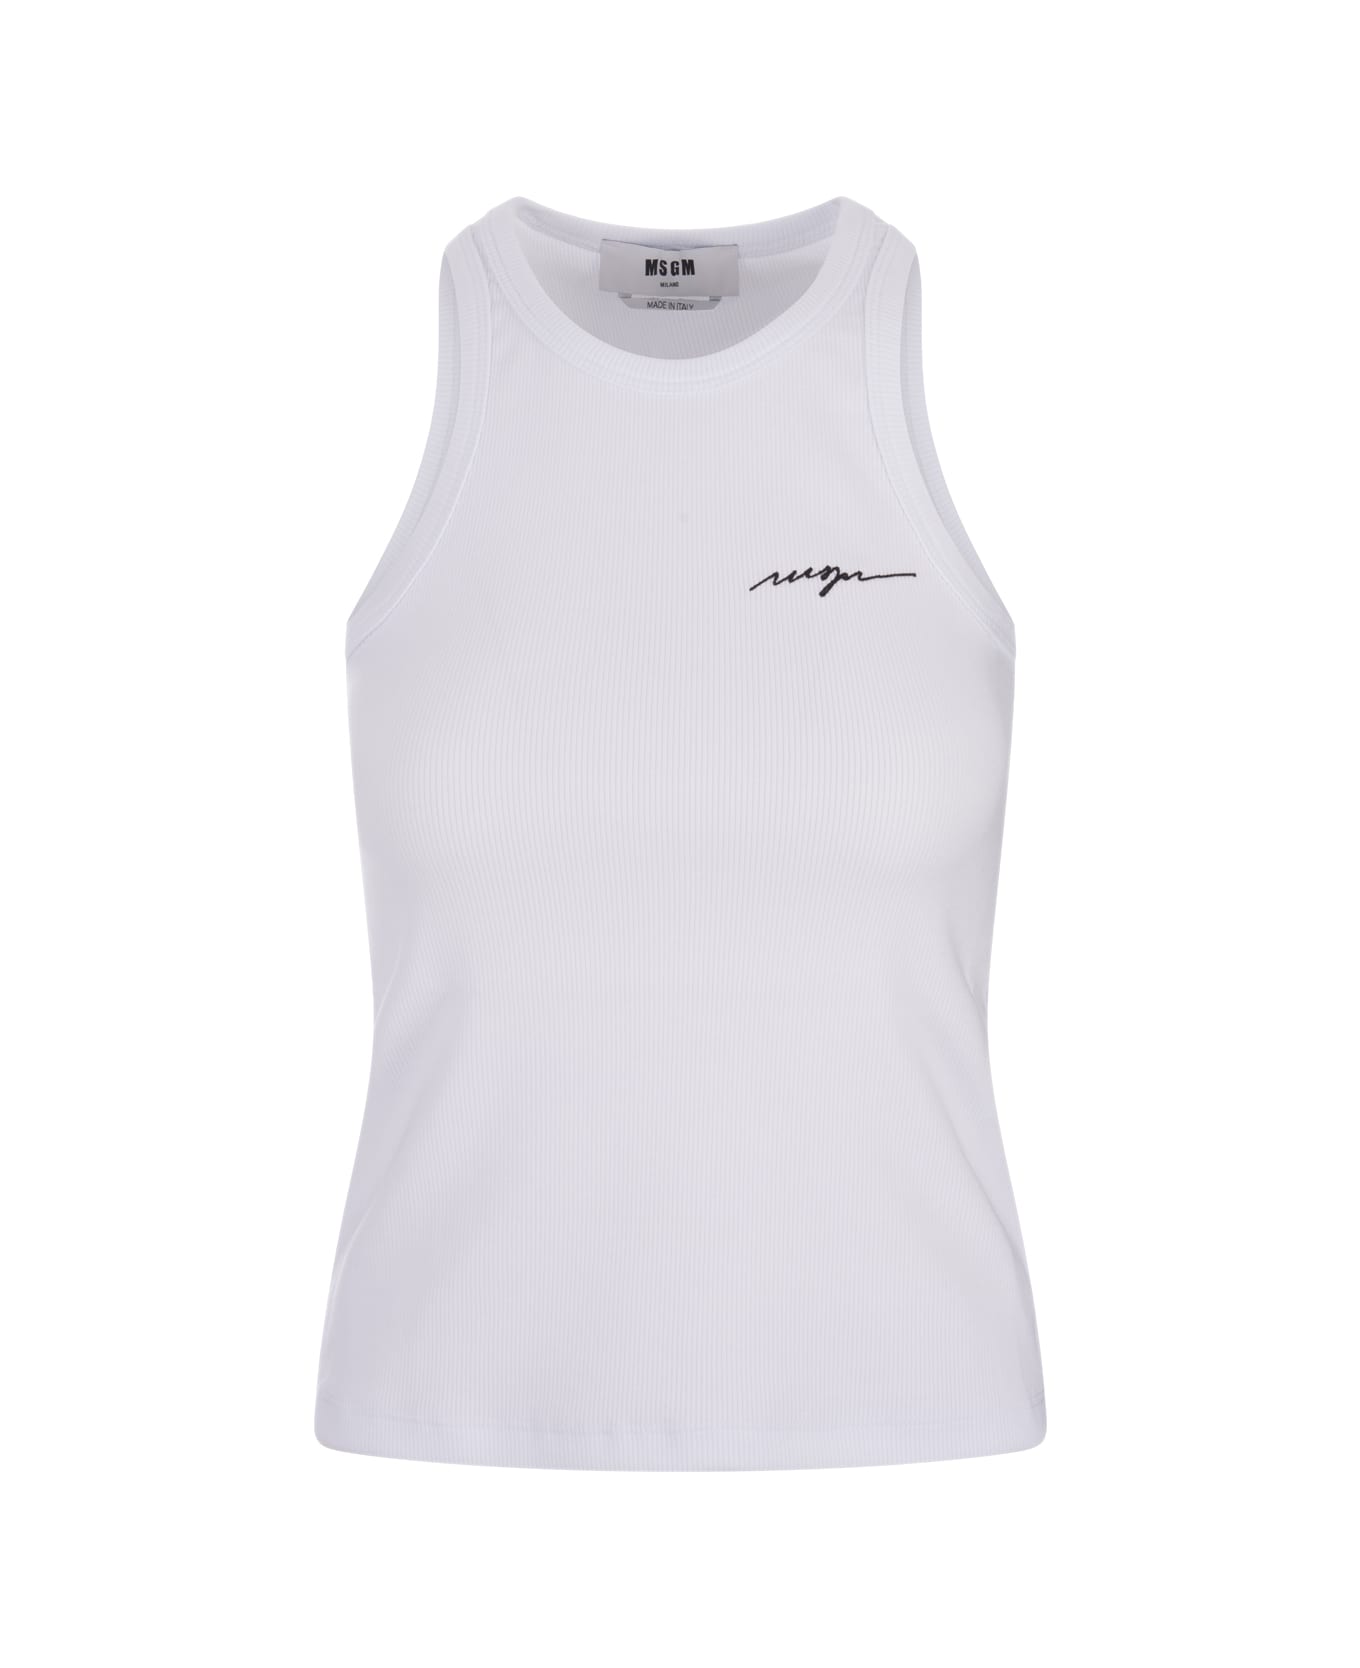 MSGM White Ribbed Tank Top With Msgm Signature - White